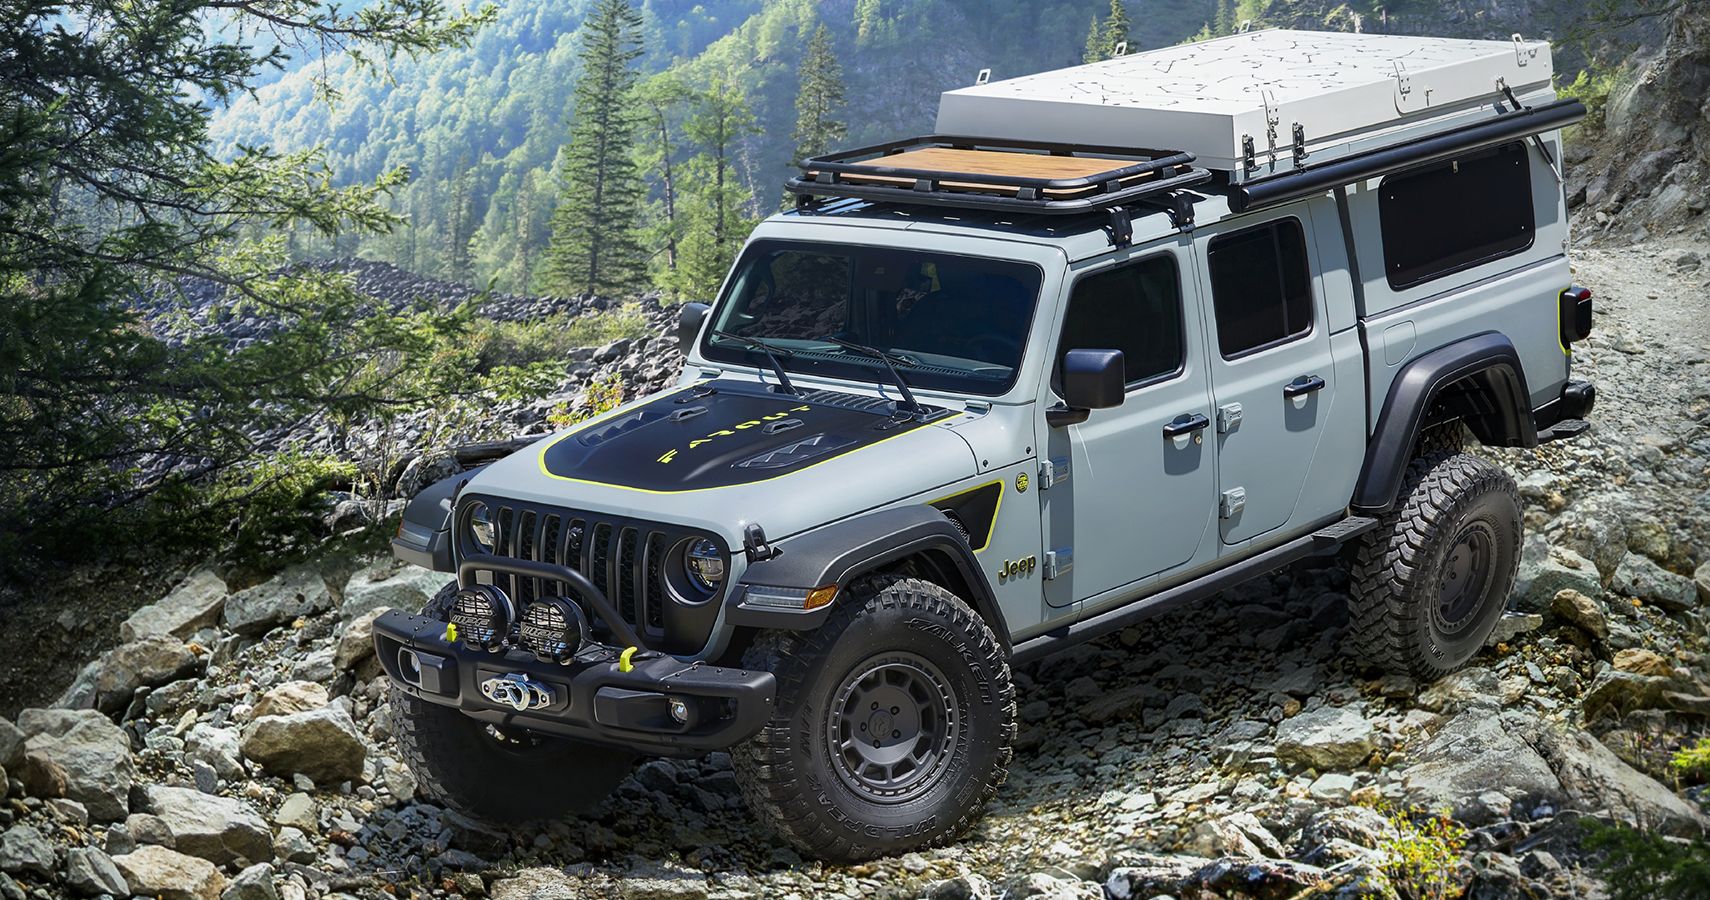 Jeep Gladiator Farout Concept front